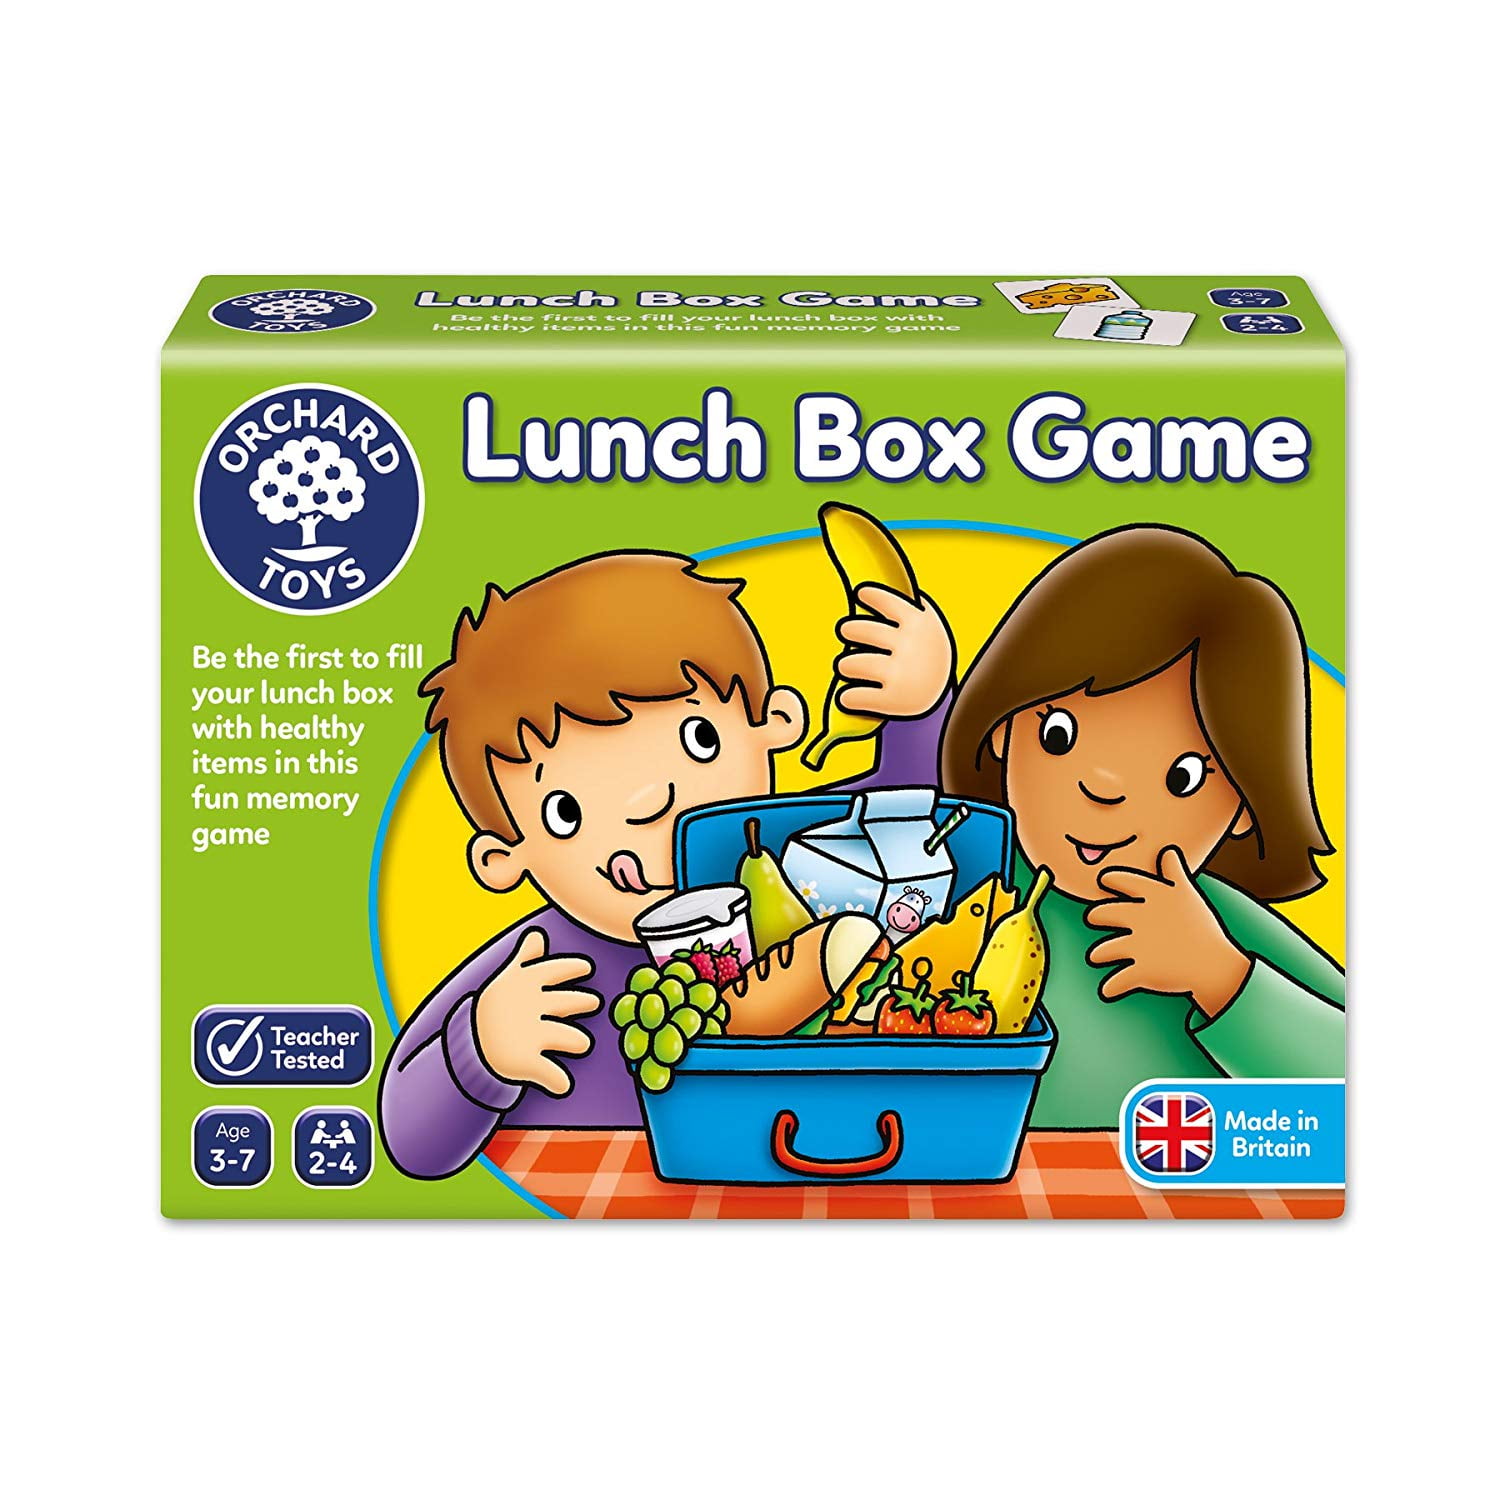 Lunch Box Game, Fun memory game! By Orchard Toys - Walmart.com